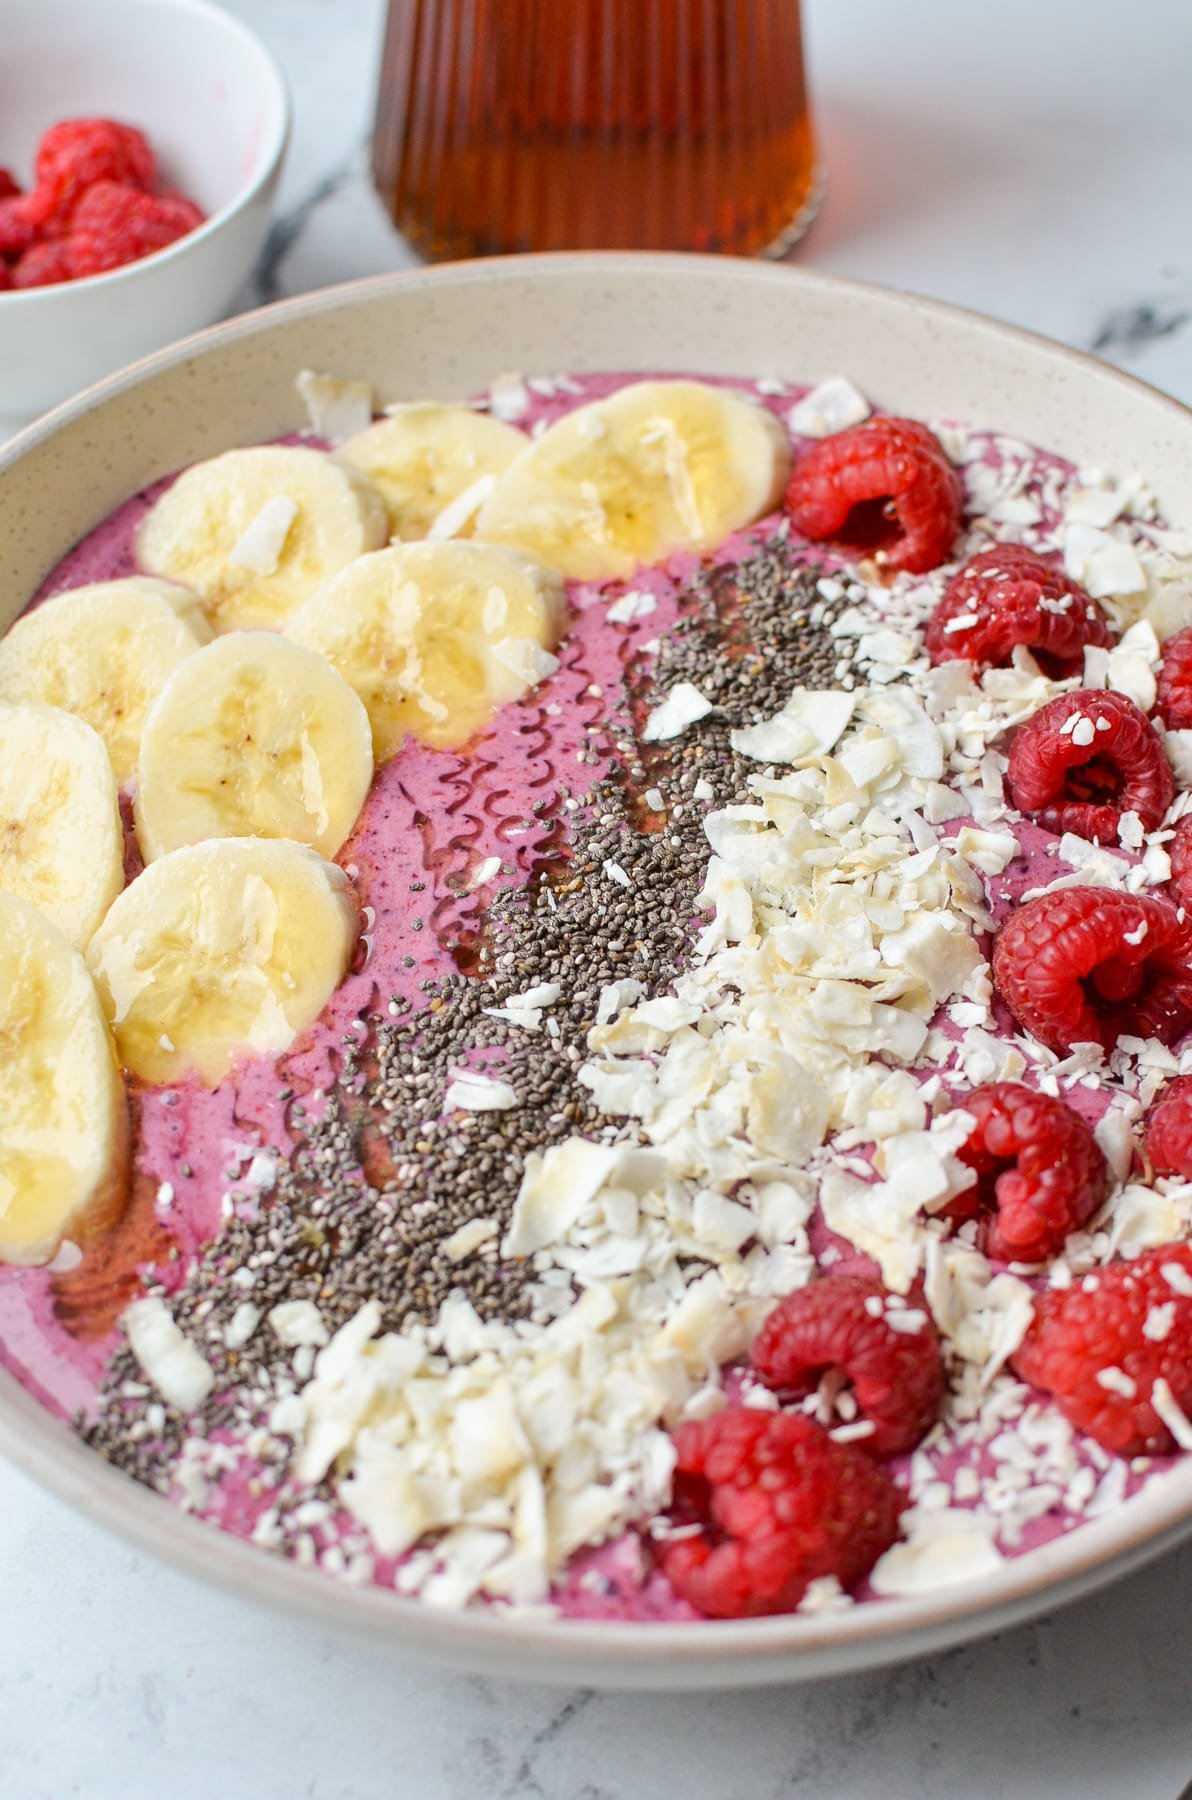 A close up of a smoothie bowl with banana, chia, coconut, and raspberries.